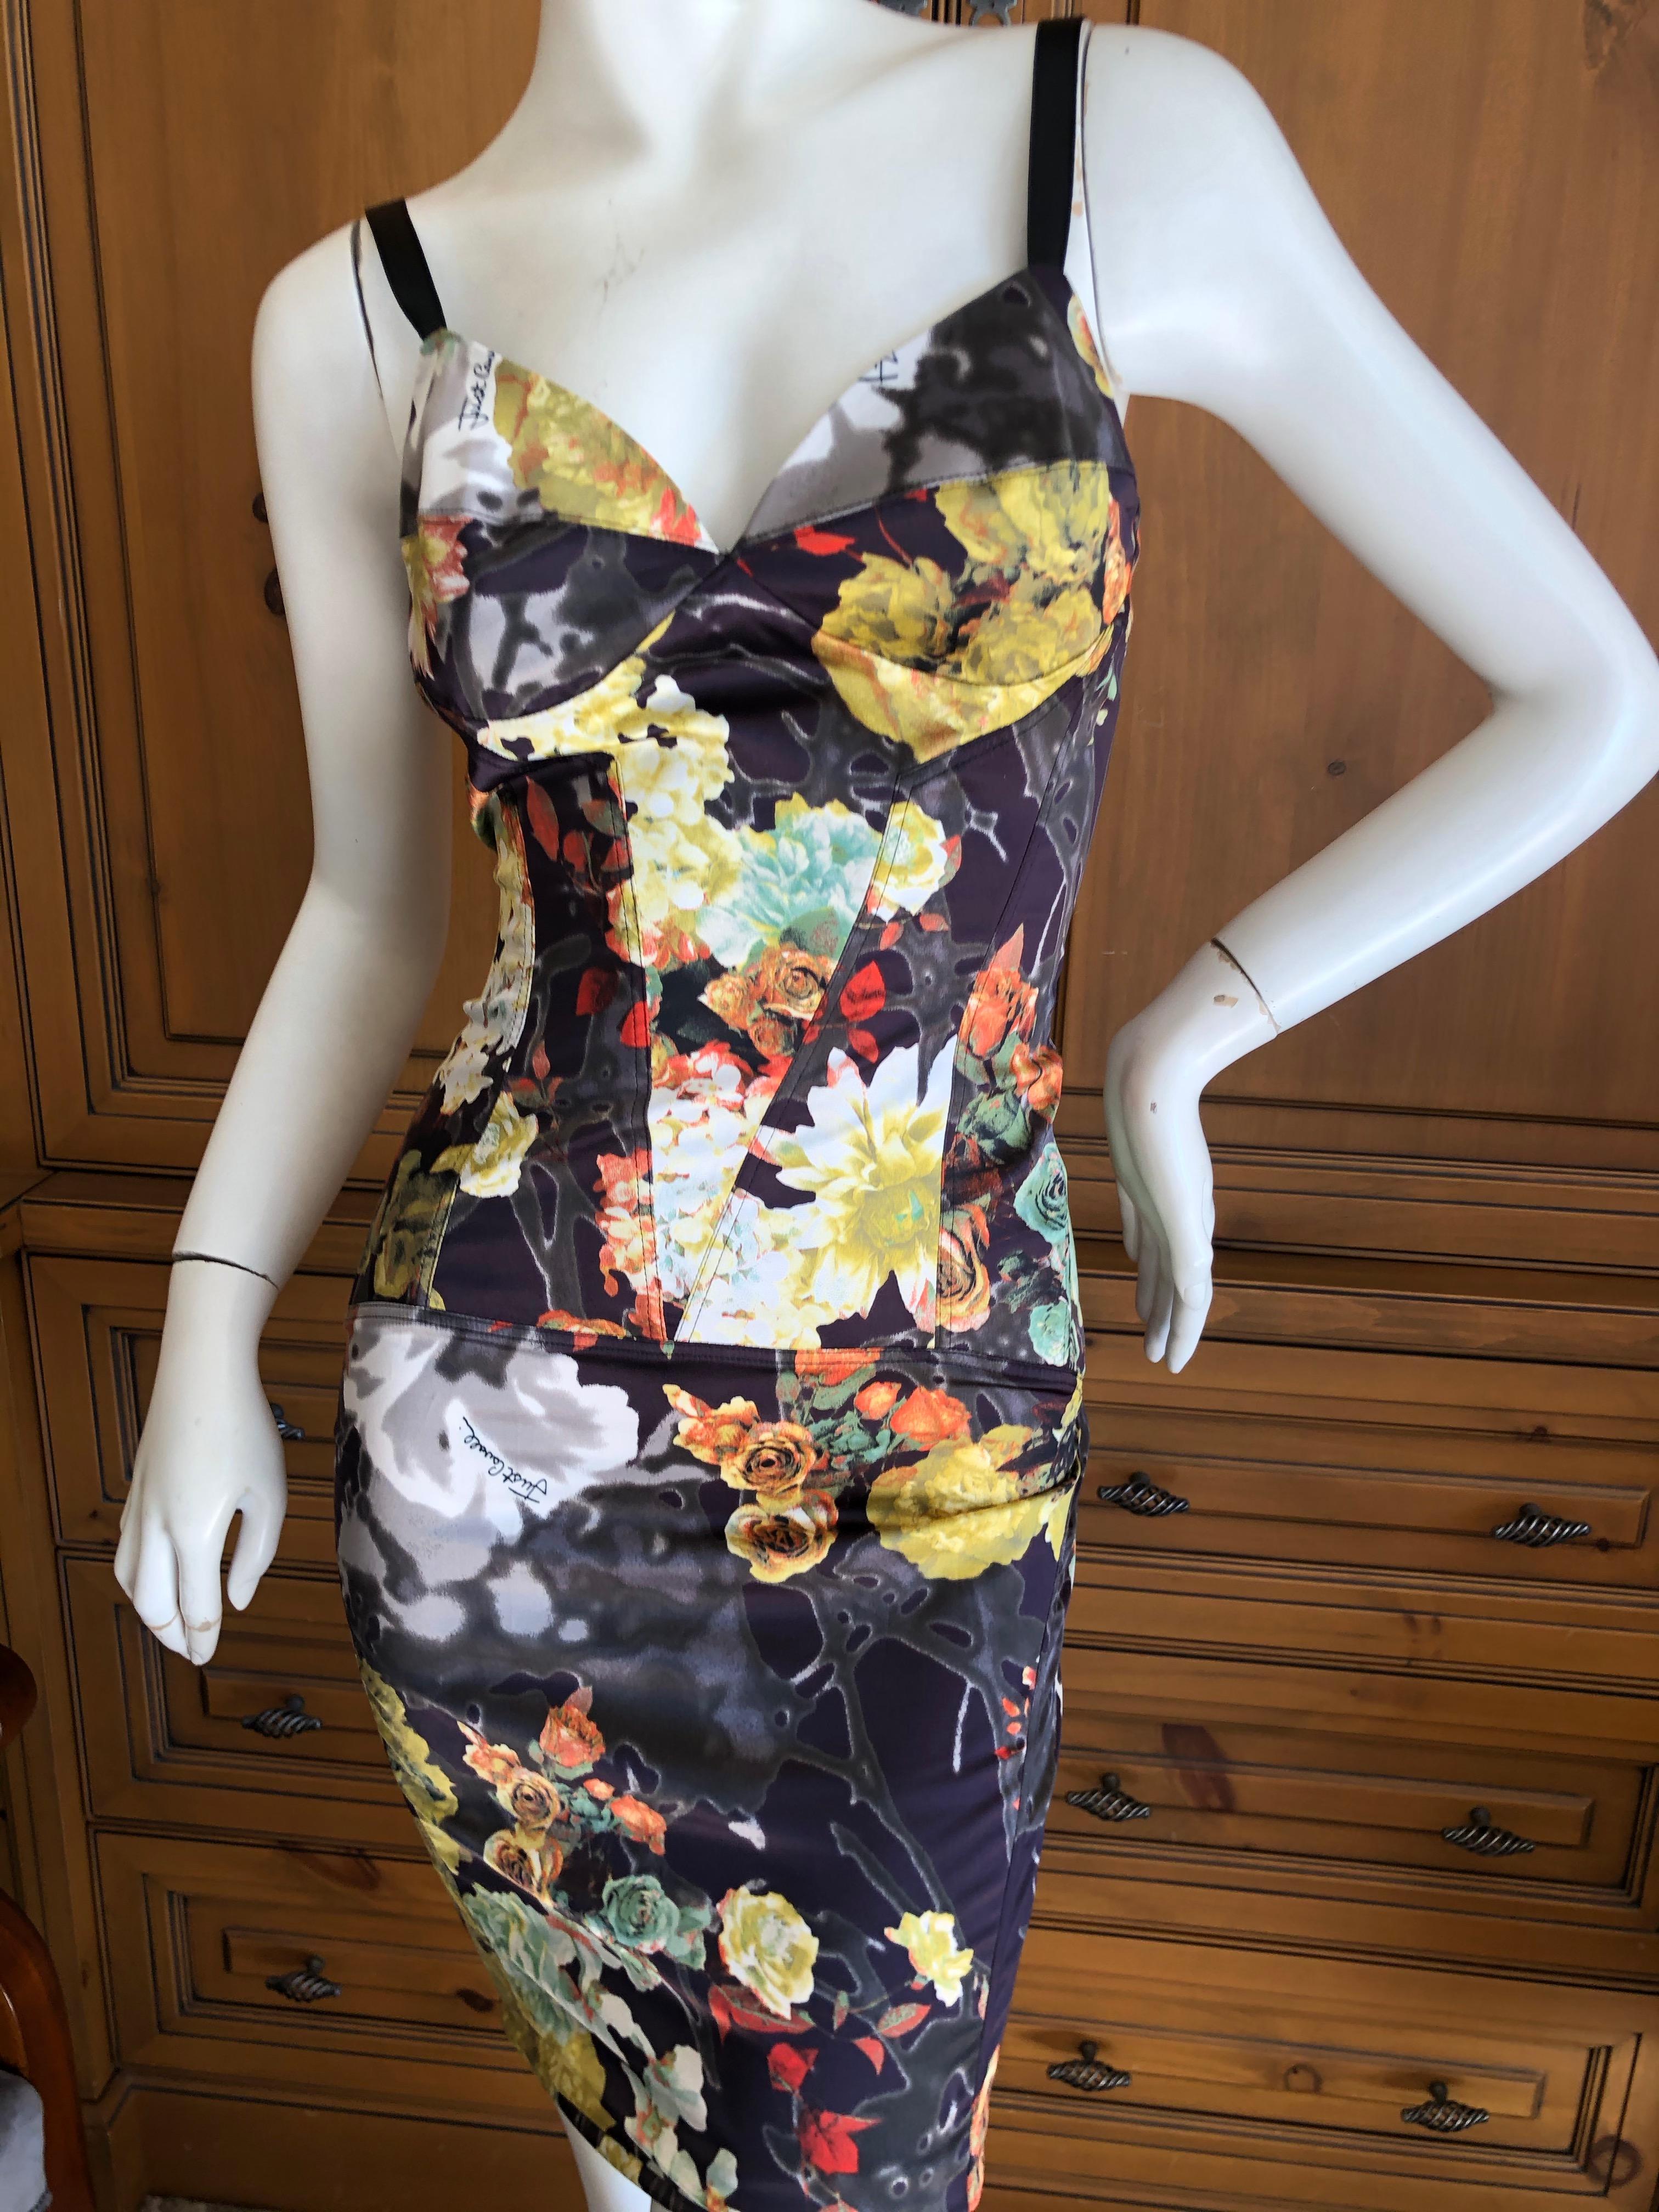 Roberto Cavalli for Just Cavalli Floral Dress with Corset Like Details In Excellent Condition For Sale In Cloverdale, CA